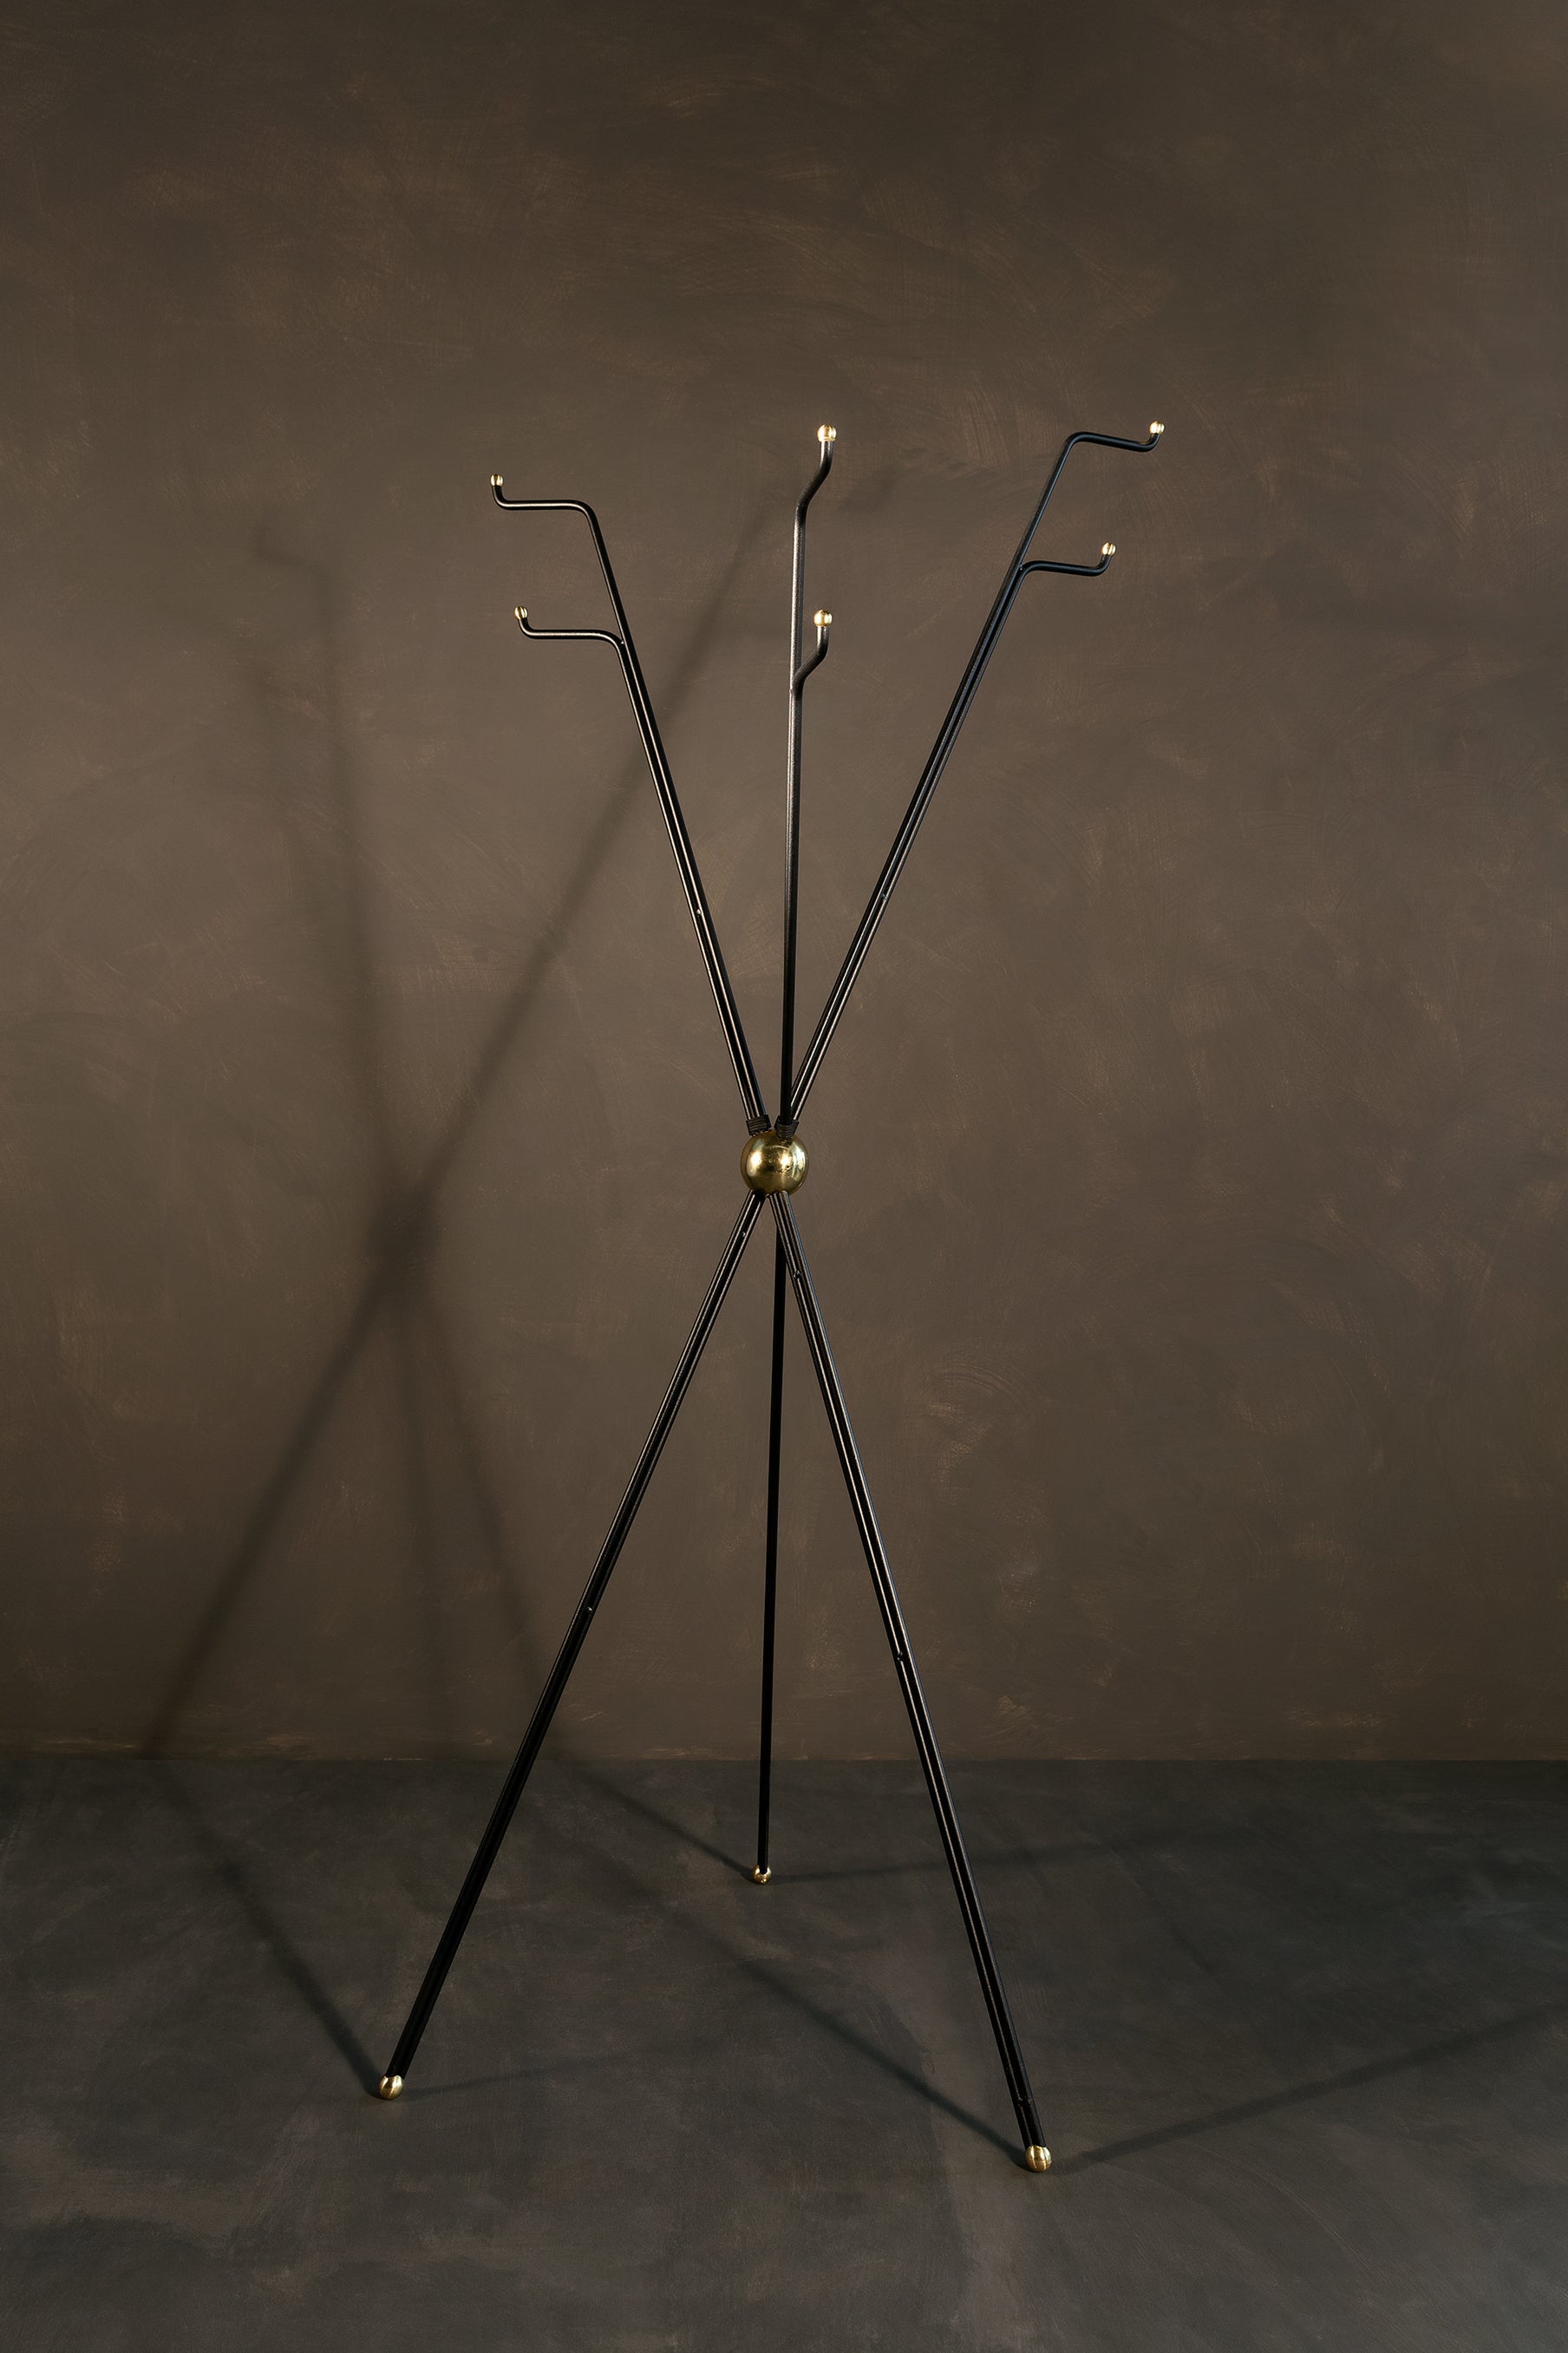 Coat Rack by Estudio Andean
Dimensions: D 63 x H 170 cm
Materials: steel, bronze.

Coat rack of 3 different heights, made of steel rods with a central sphere of sand-cast bronze and lathed bronze hardware.

ALEJANDRO MOYANO
FOUNDER &